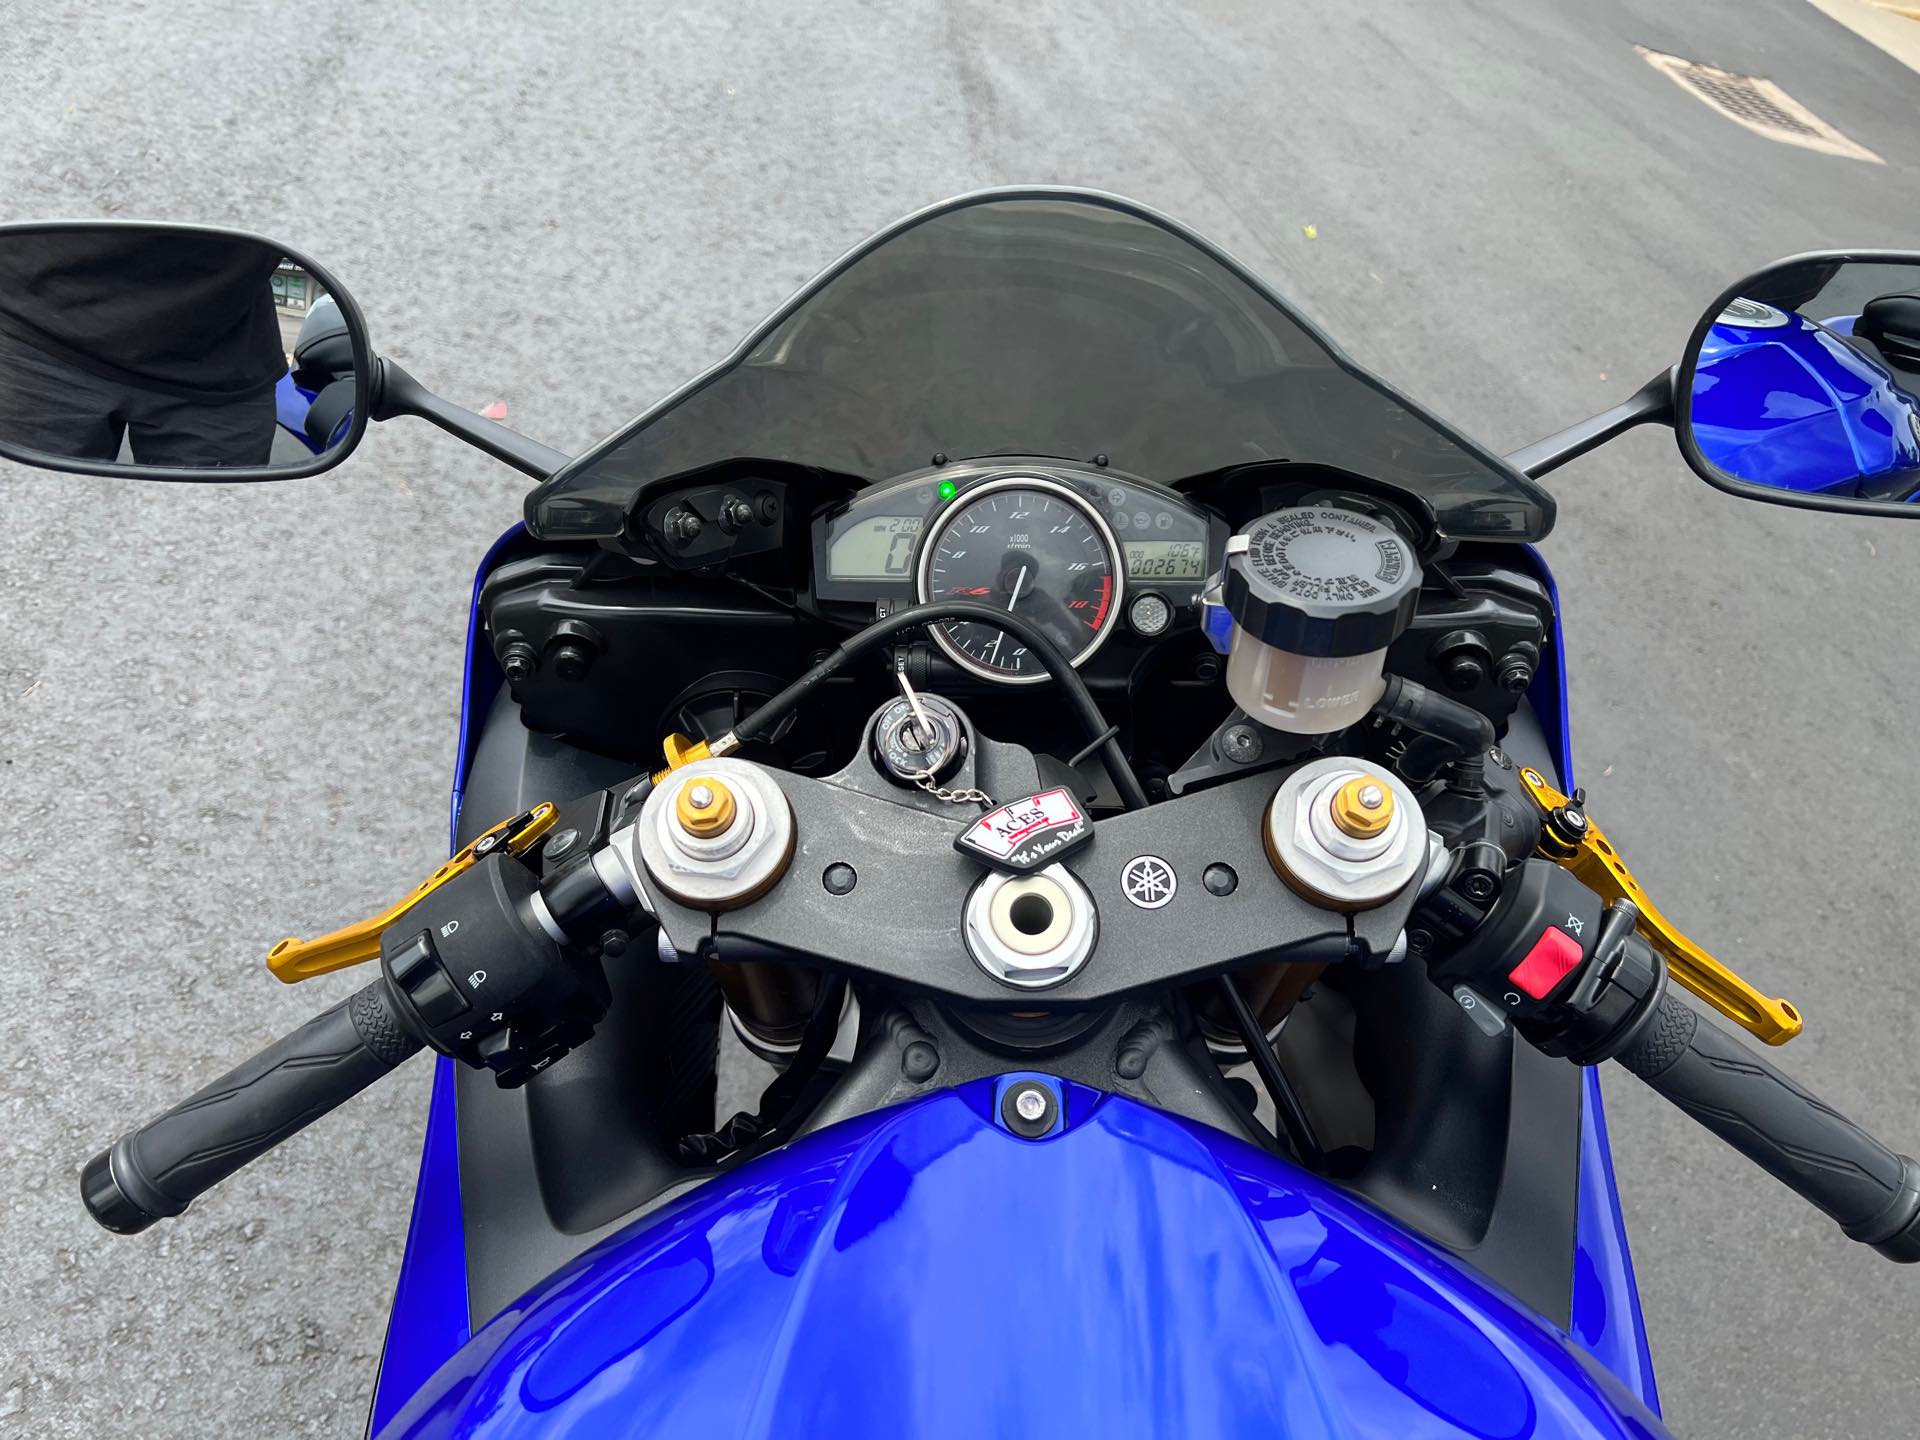 2012 Yamaha YZF R6 at Aces Motorcycles - Fort Collins